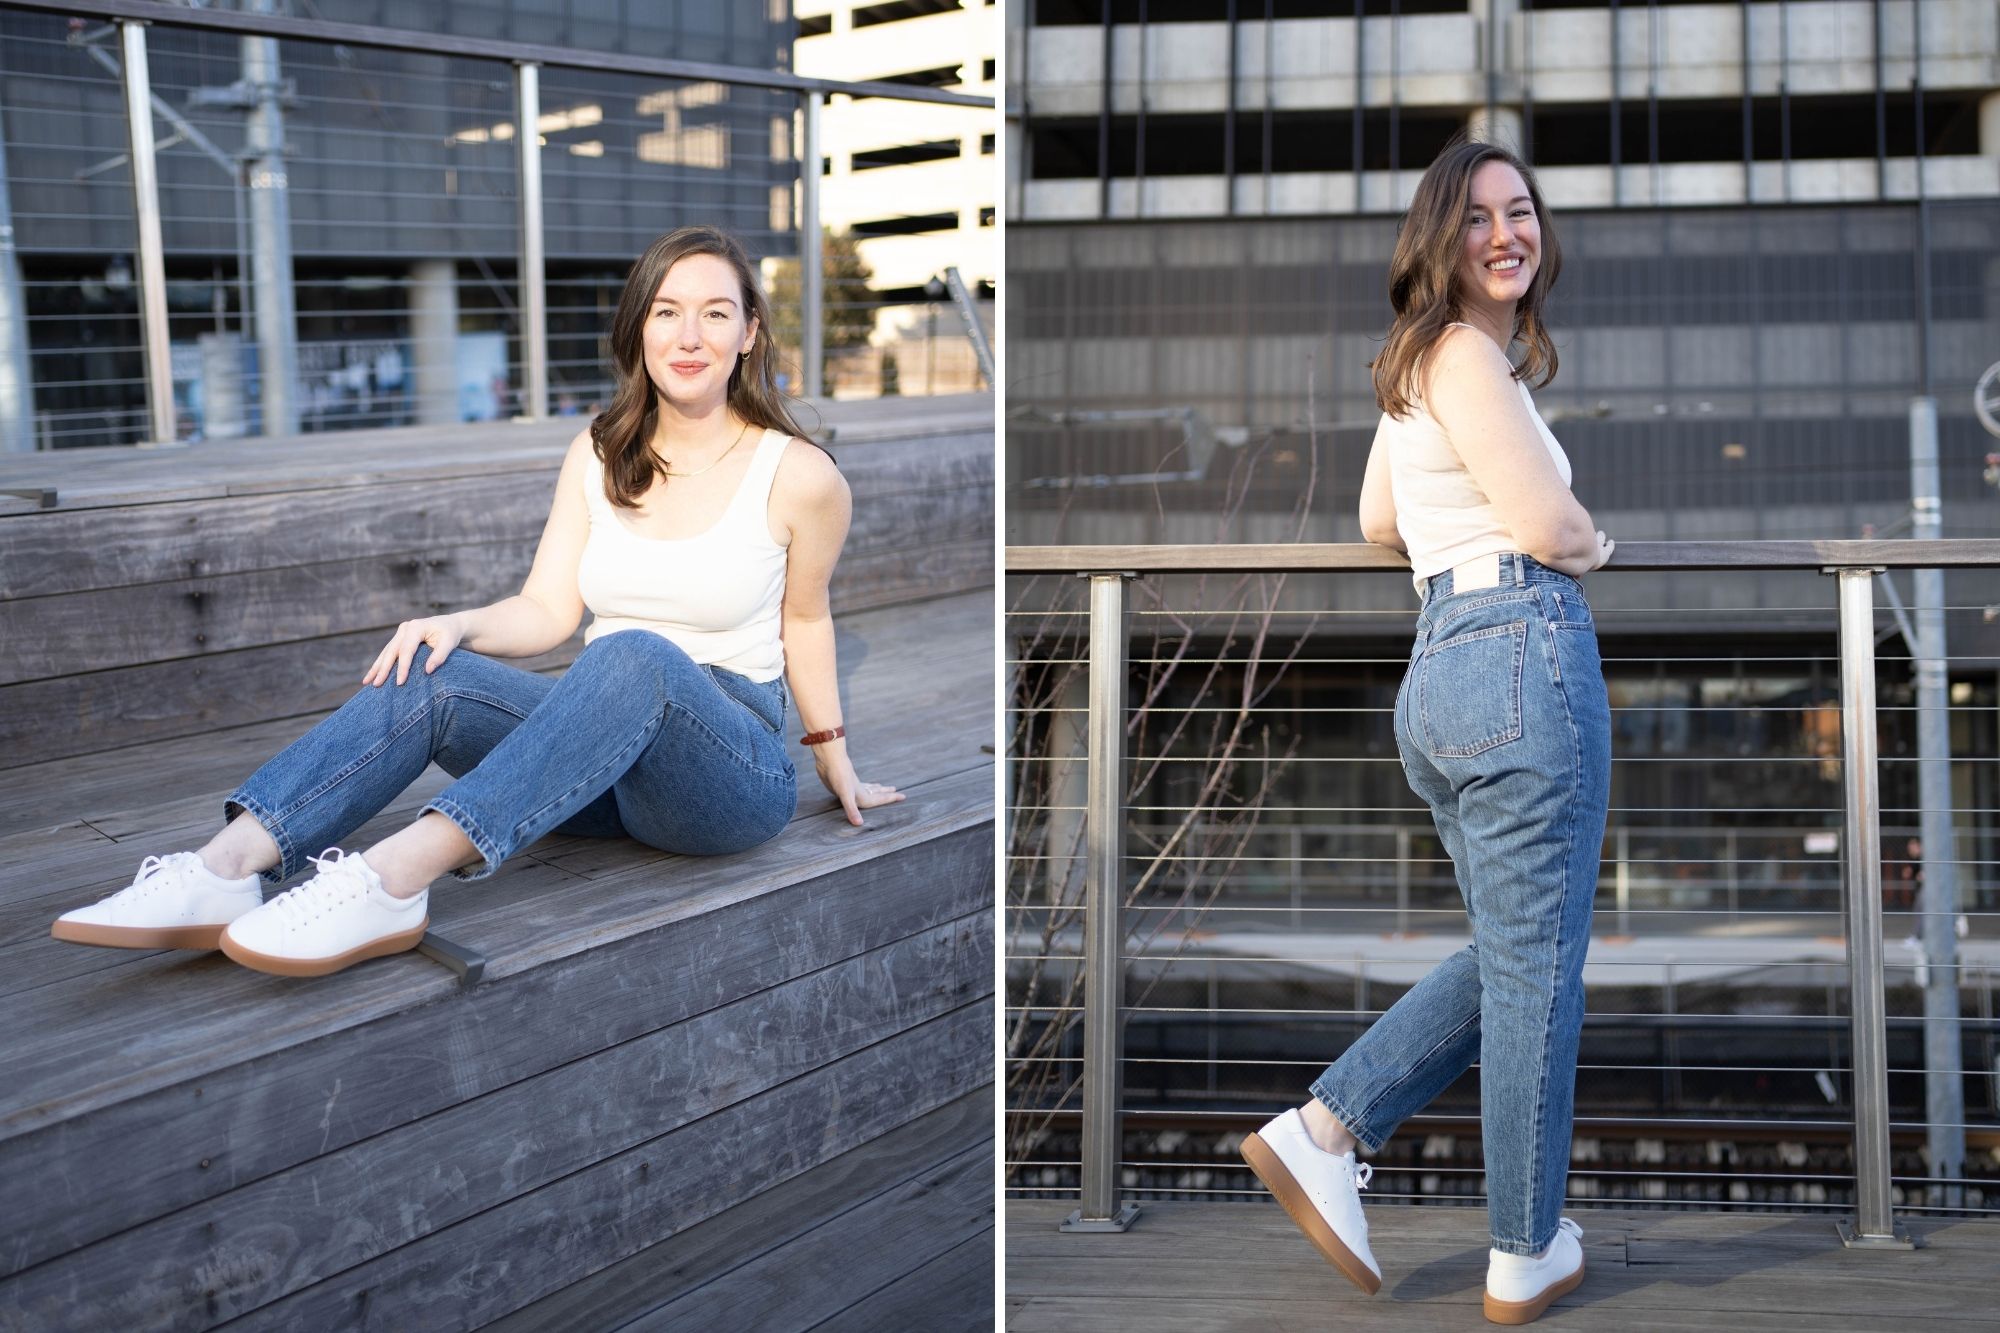 two images of Alyssa (one standing and one sitting) wearing a cream tank, blue jeans, and white sneakers